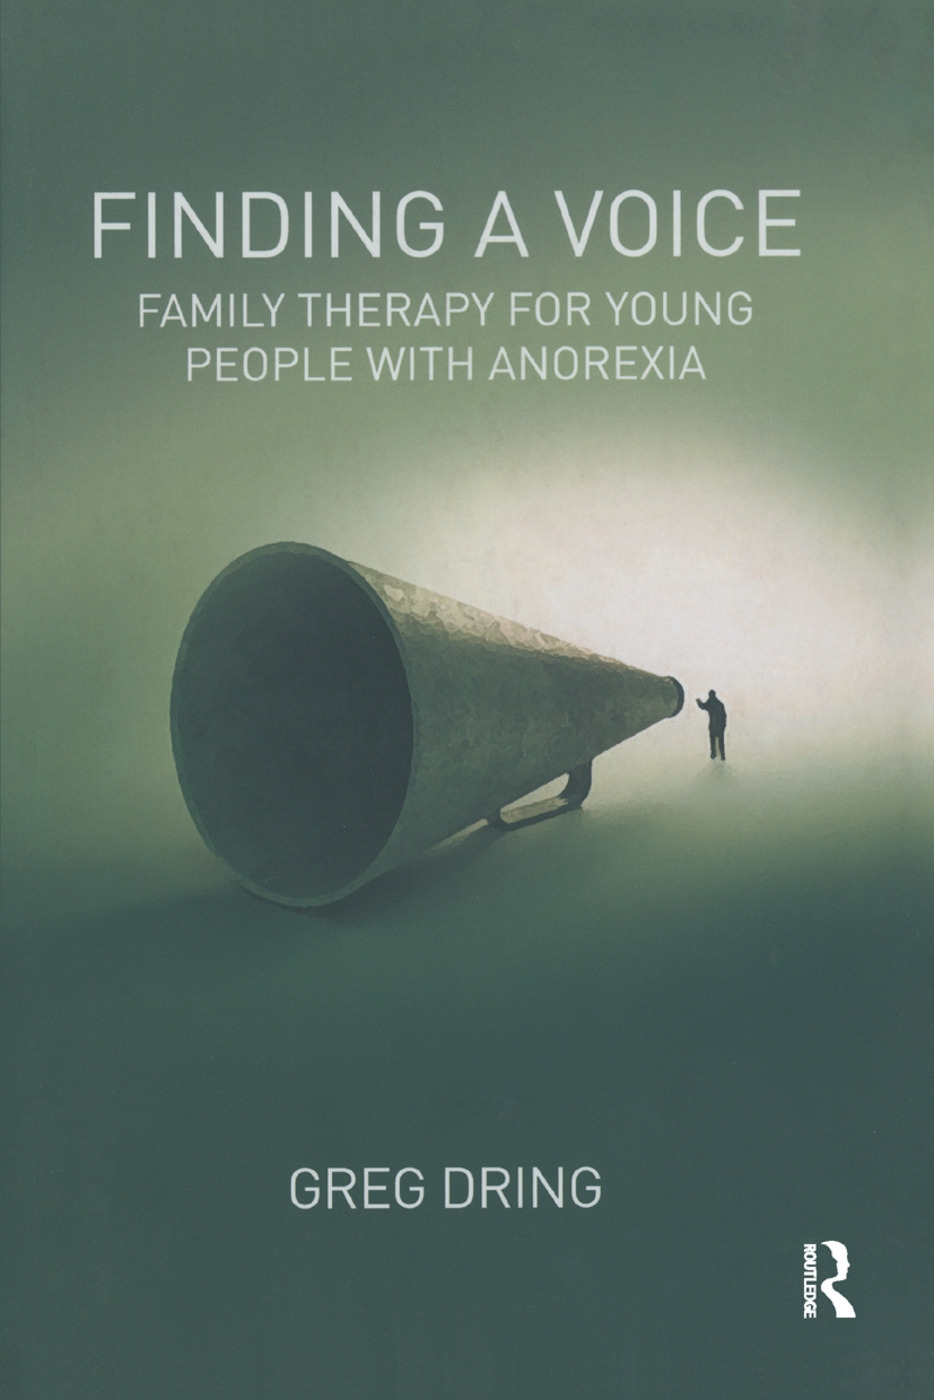 Finding a Voice: Family Therapy for Young People With Anorexia